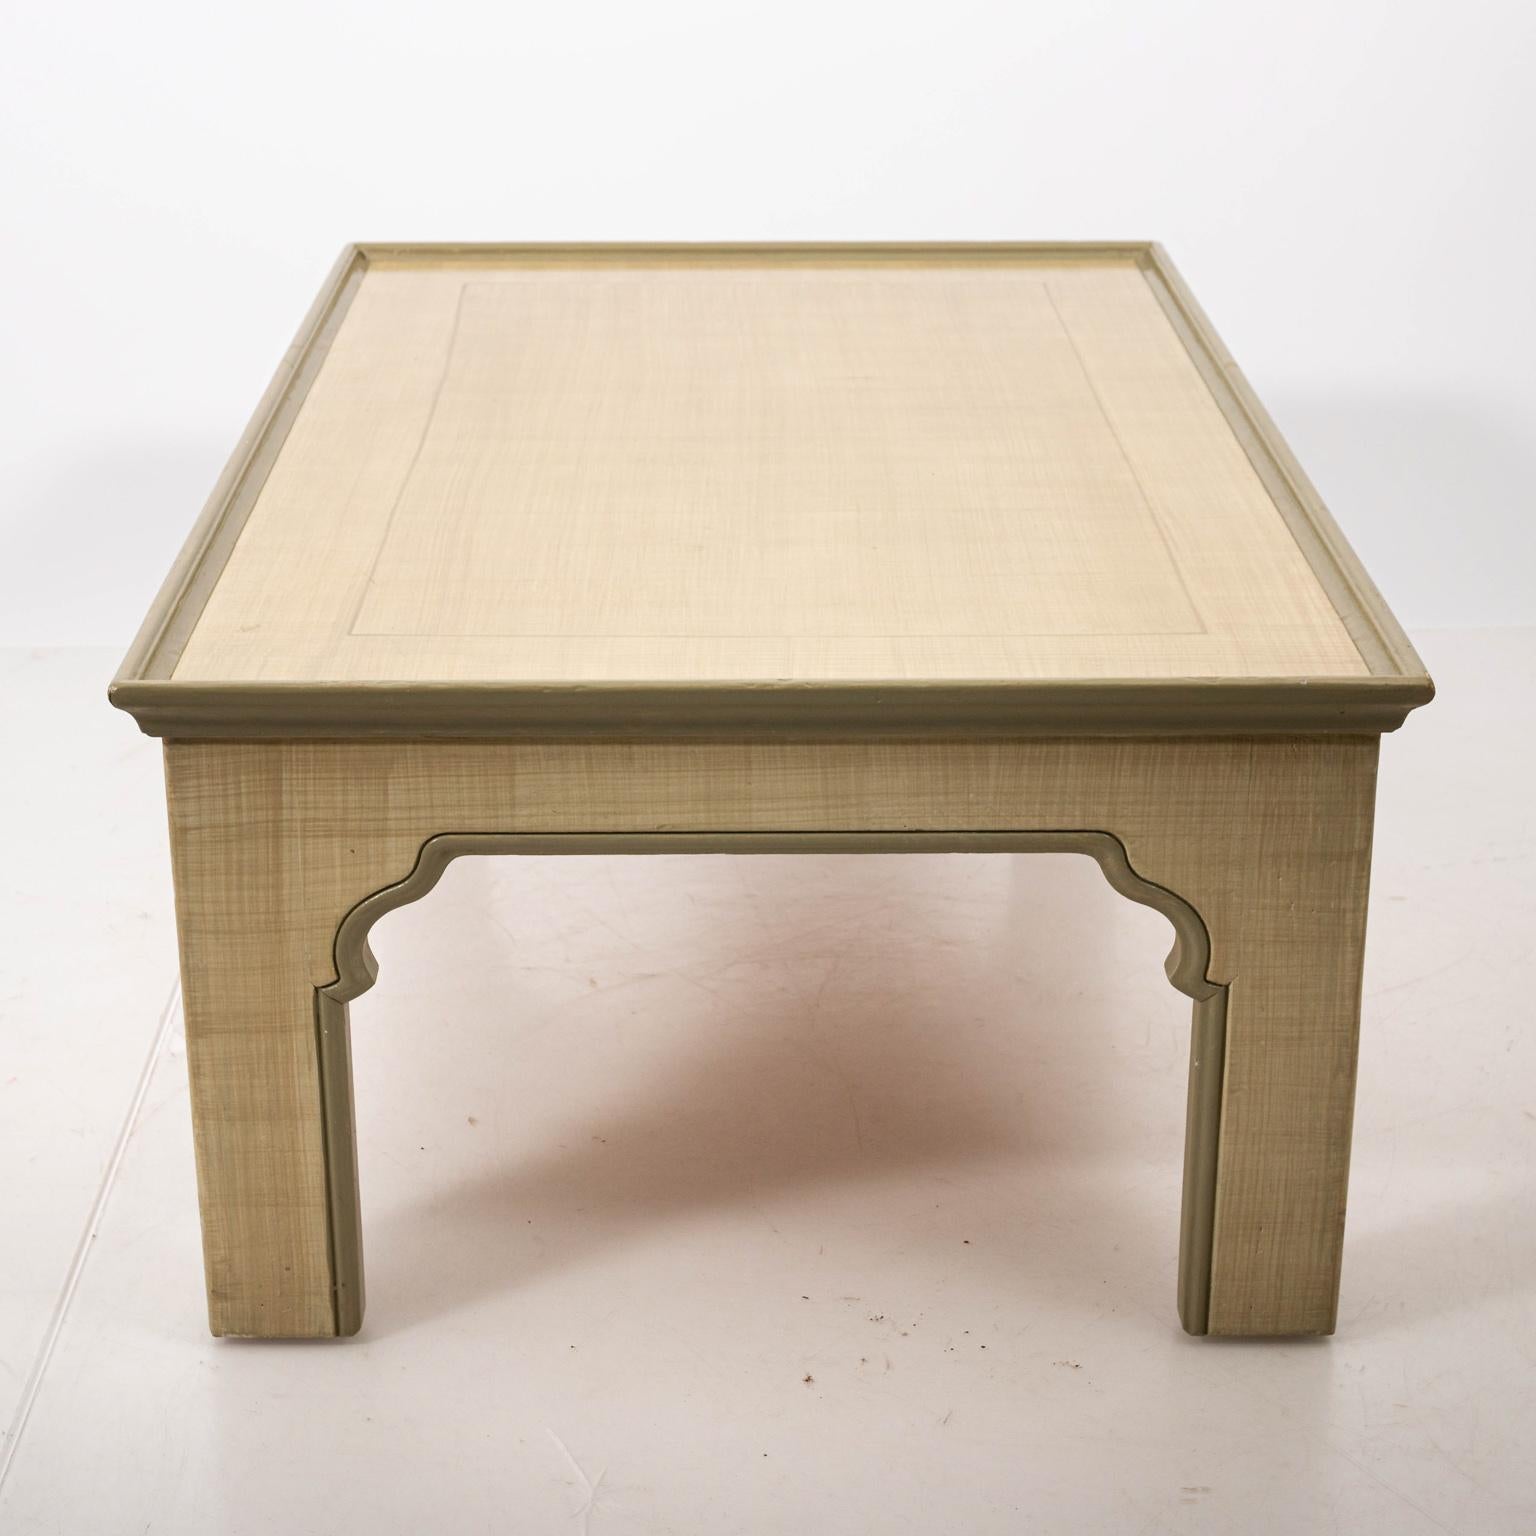 Late 20th Century Hand Stained Rectangular Coffee Table by Bob Christian